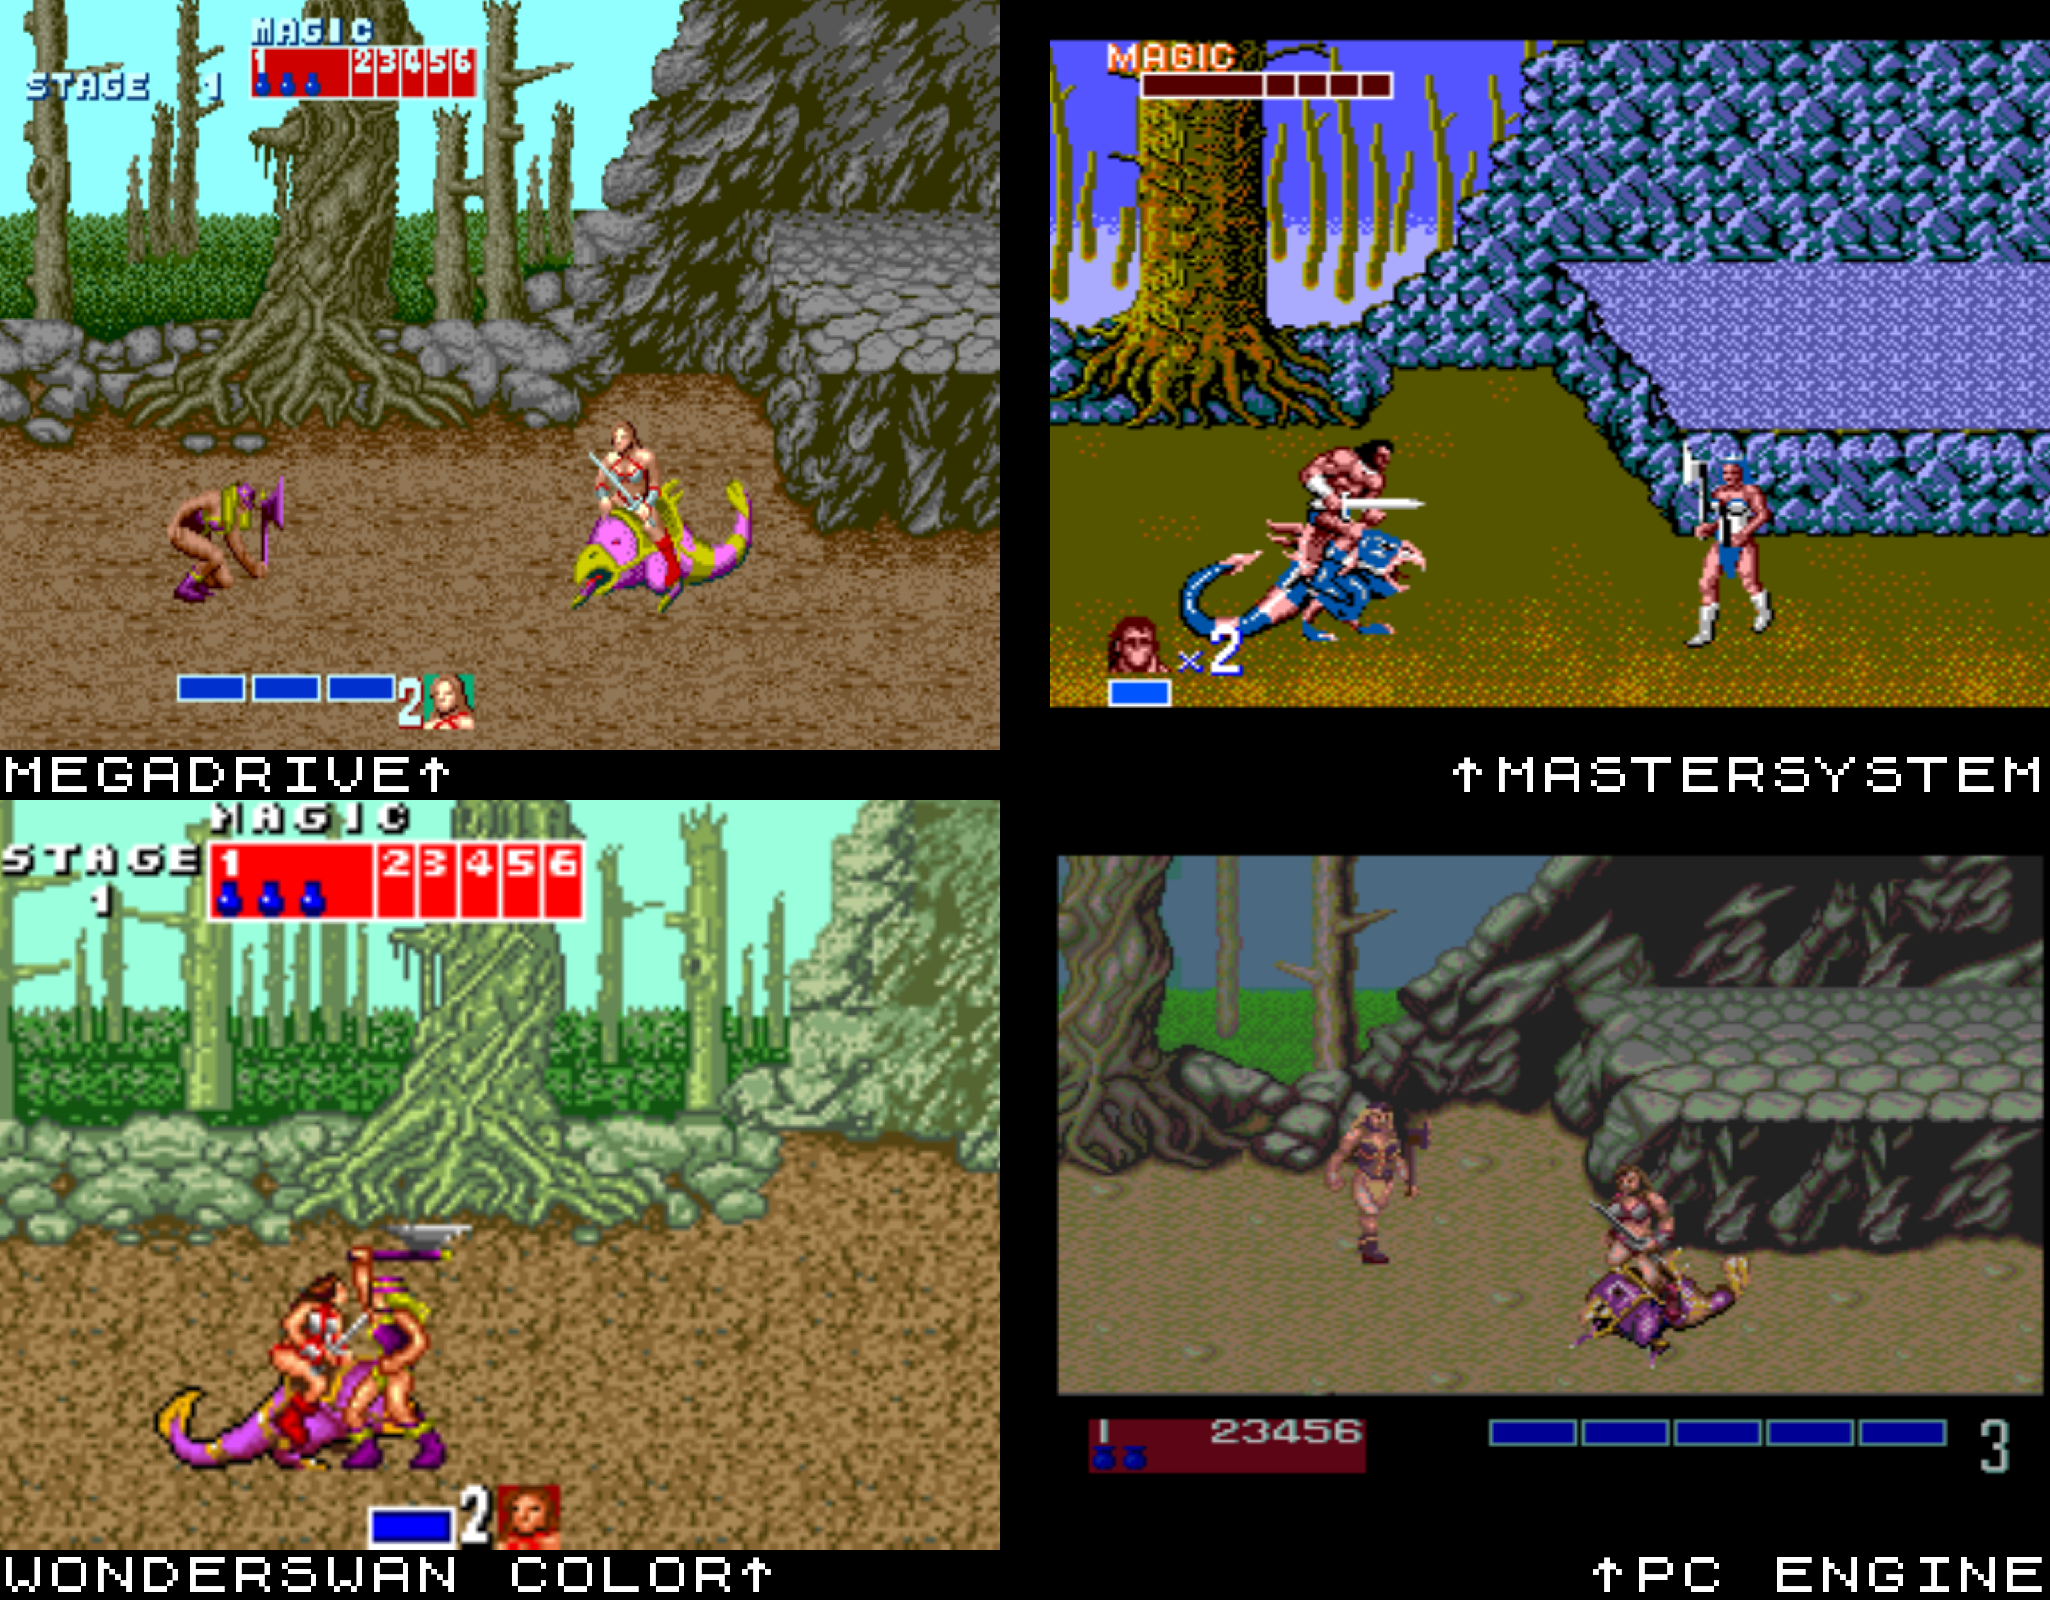 The console versions of Golden Axe